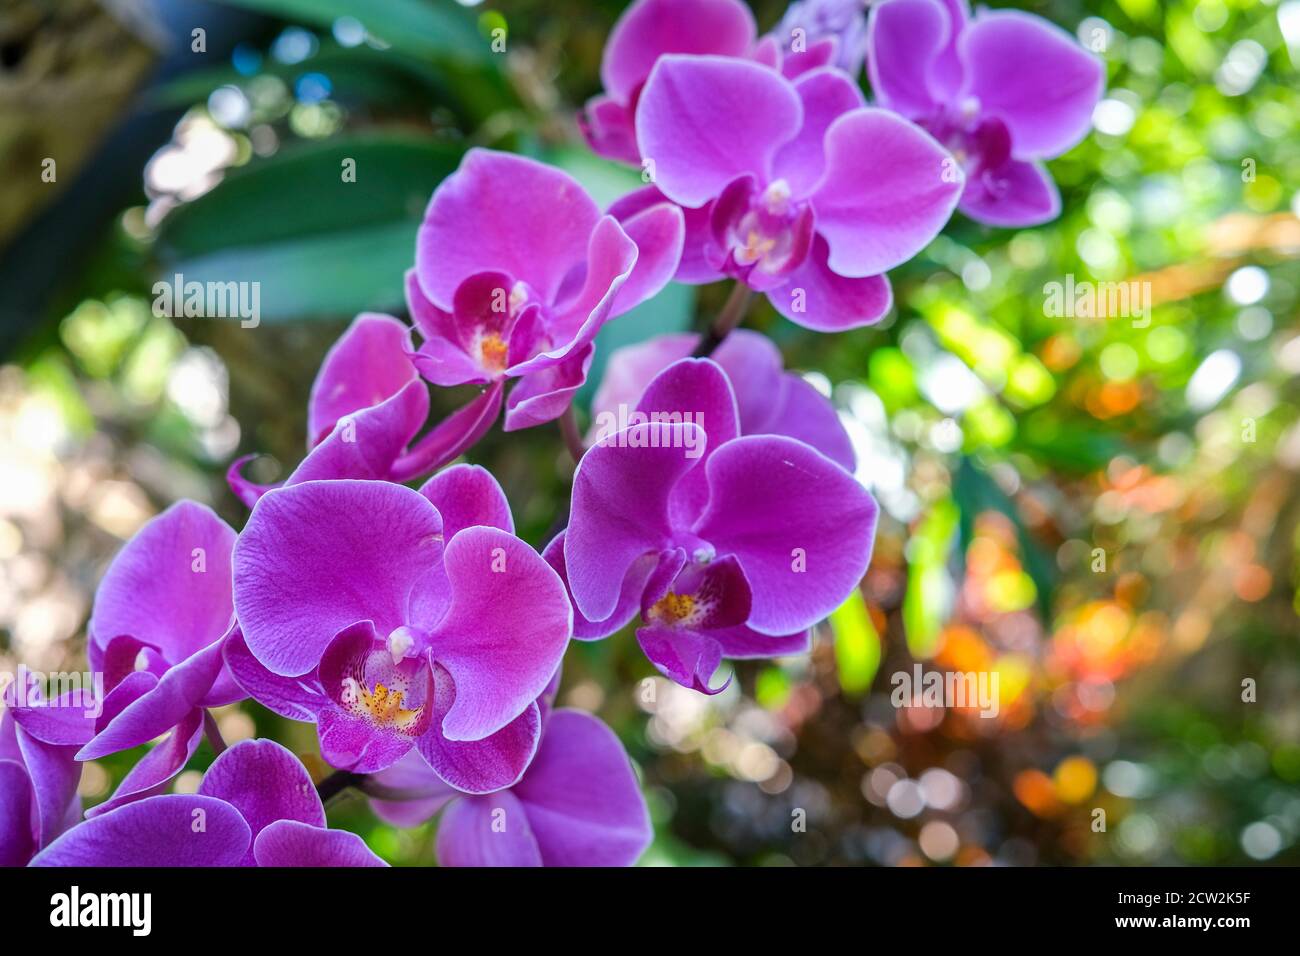 Phalaenopsis Orchid commonly known as the moth orchids, purple flowers Stock Photo